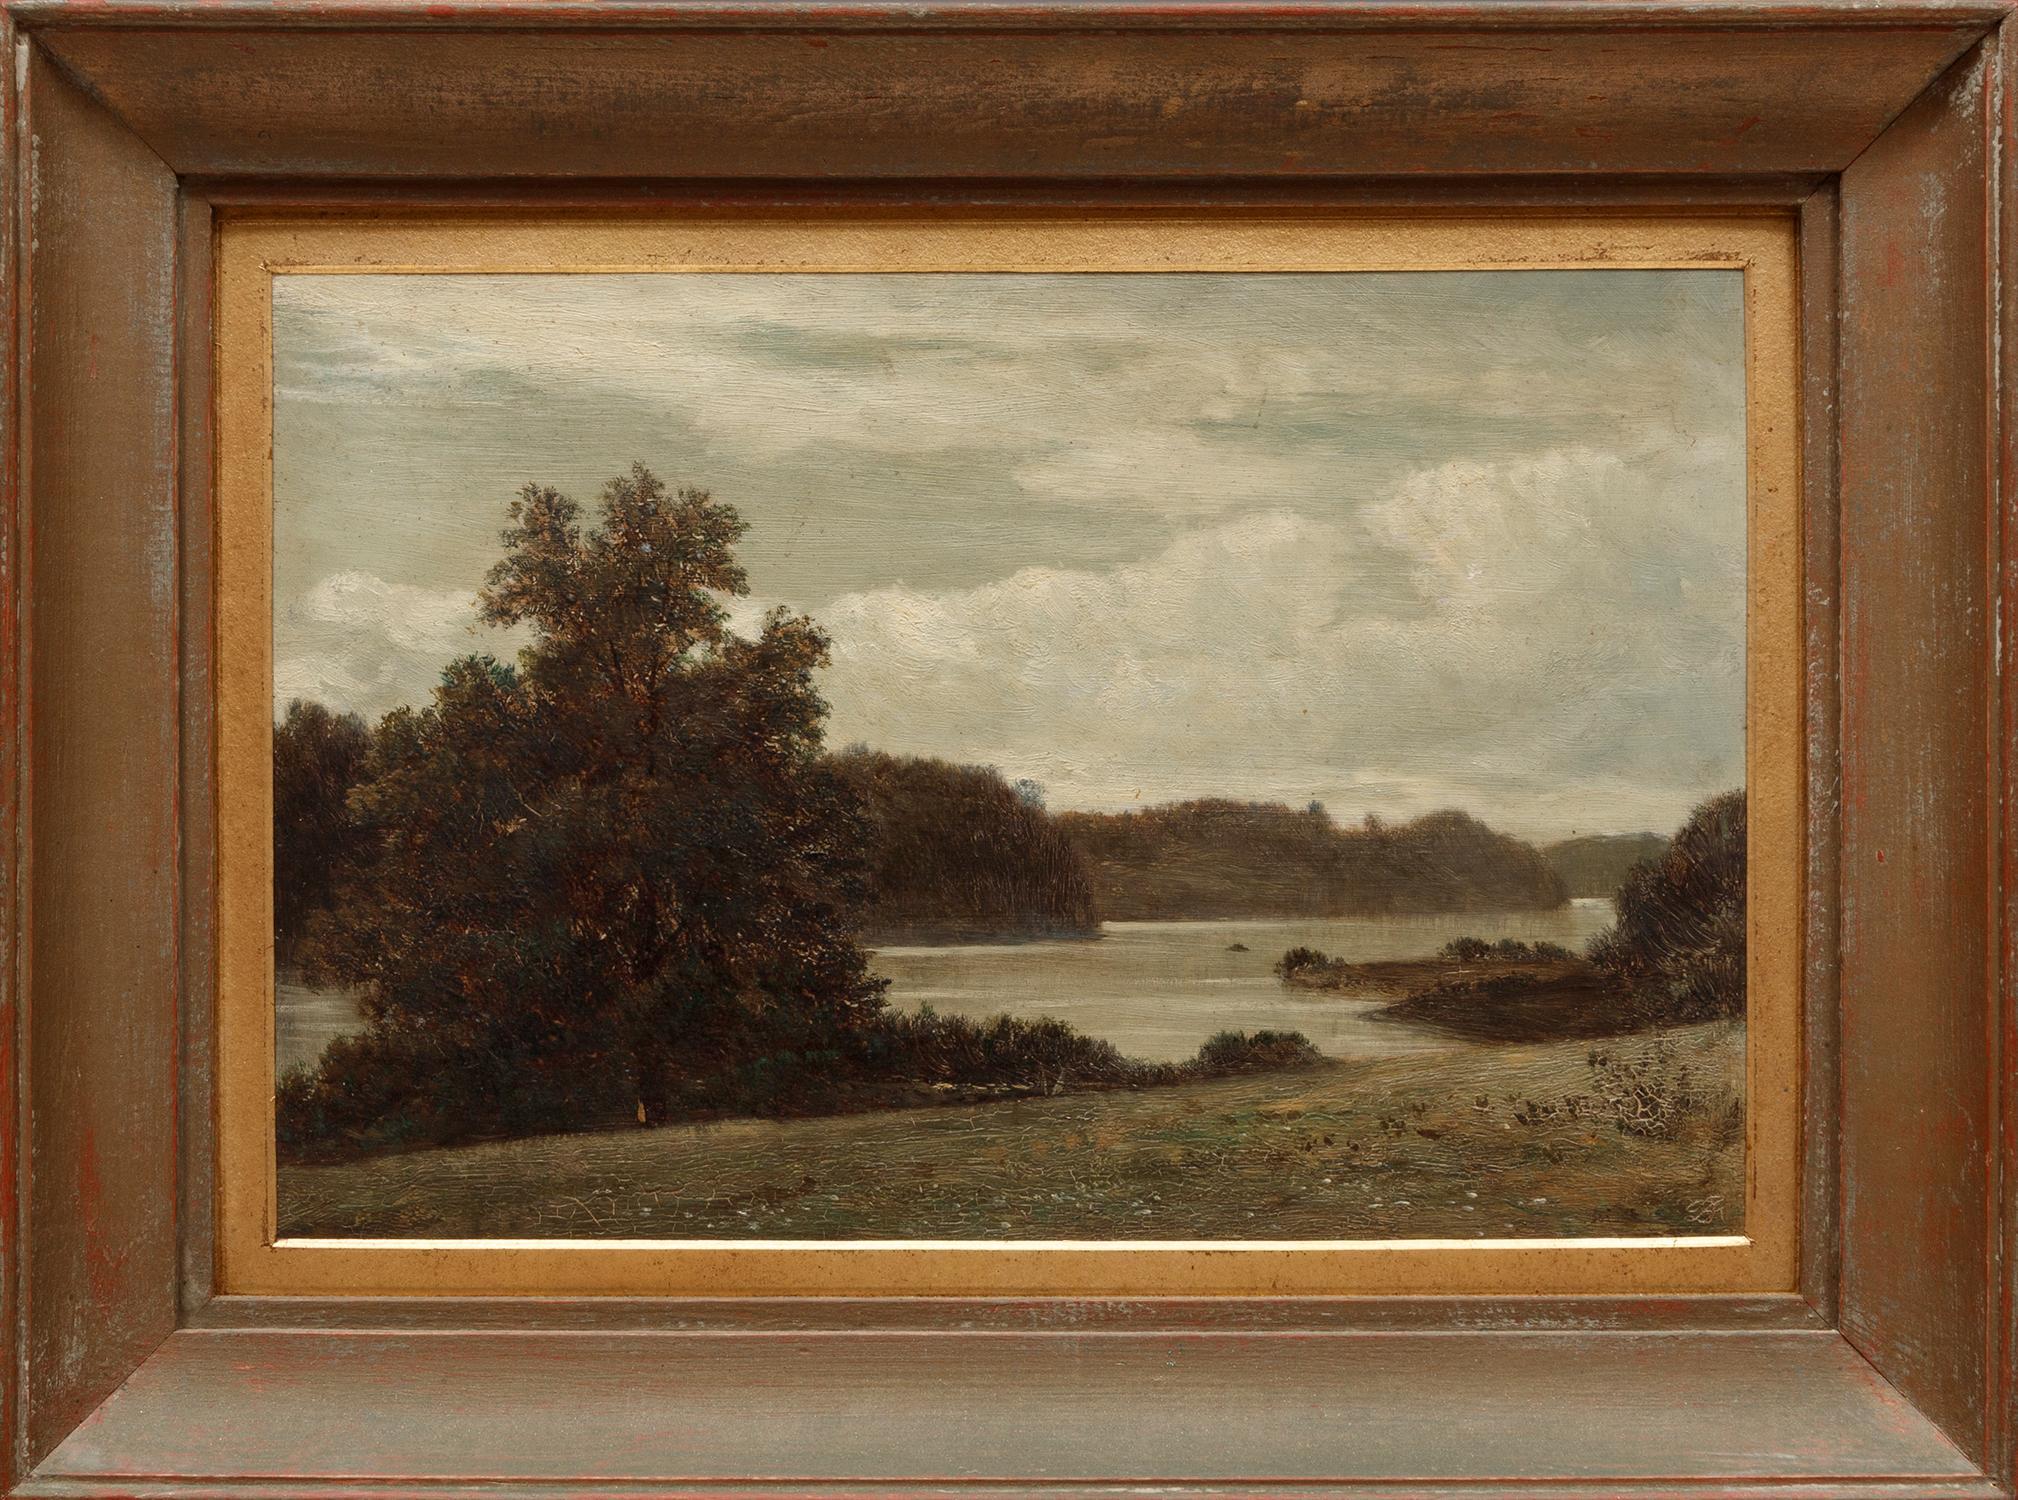 David Johnson
Byram Lake, New York
Monogrammed lower right; signed and titled on the reverse
Oil on board
7 3/4 x 11 3/4 inches

A landscape painter based in New York City and associated with the second generation of Hudson River School* painters,